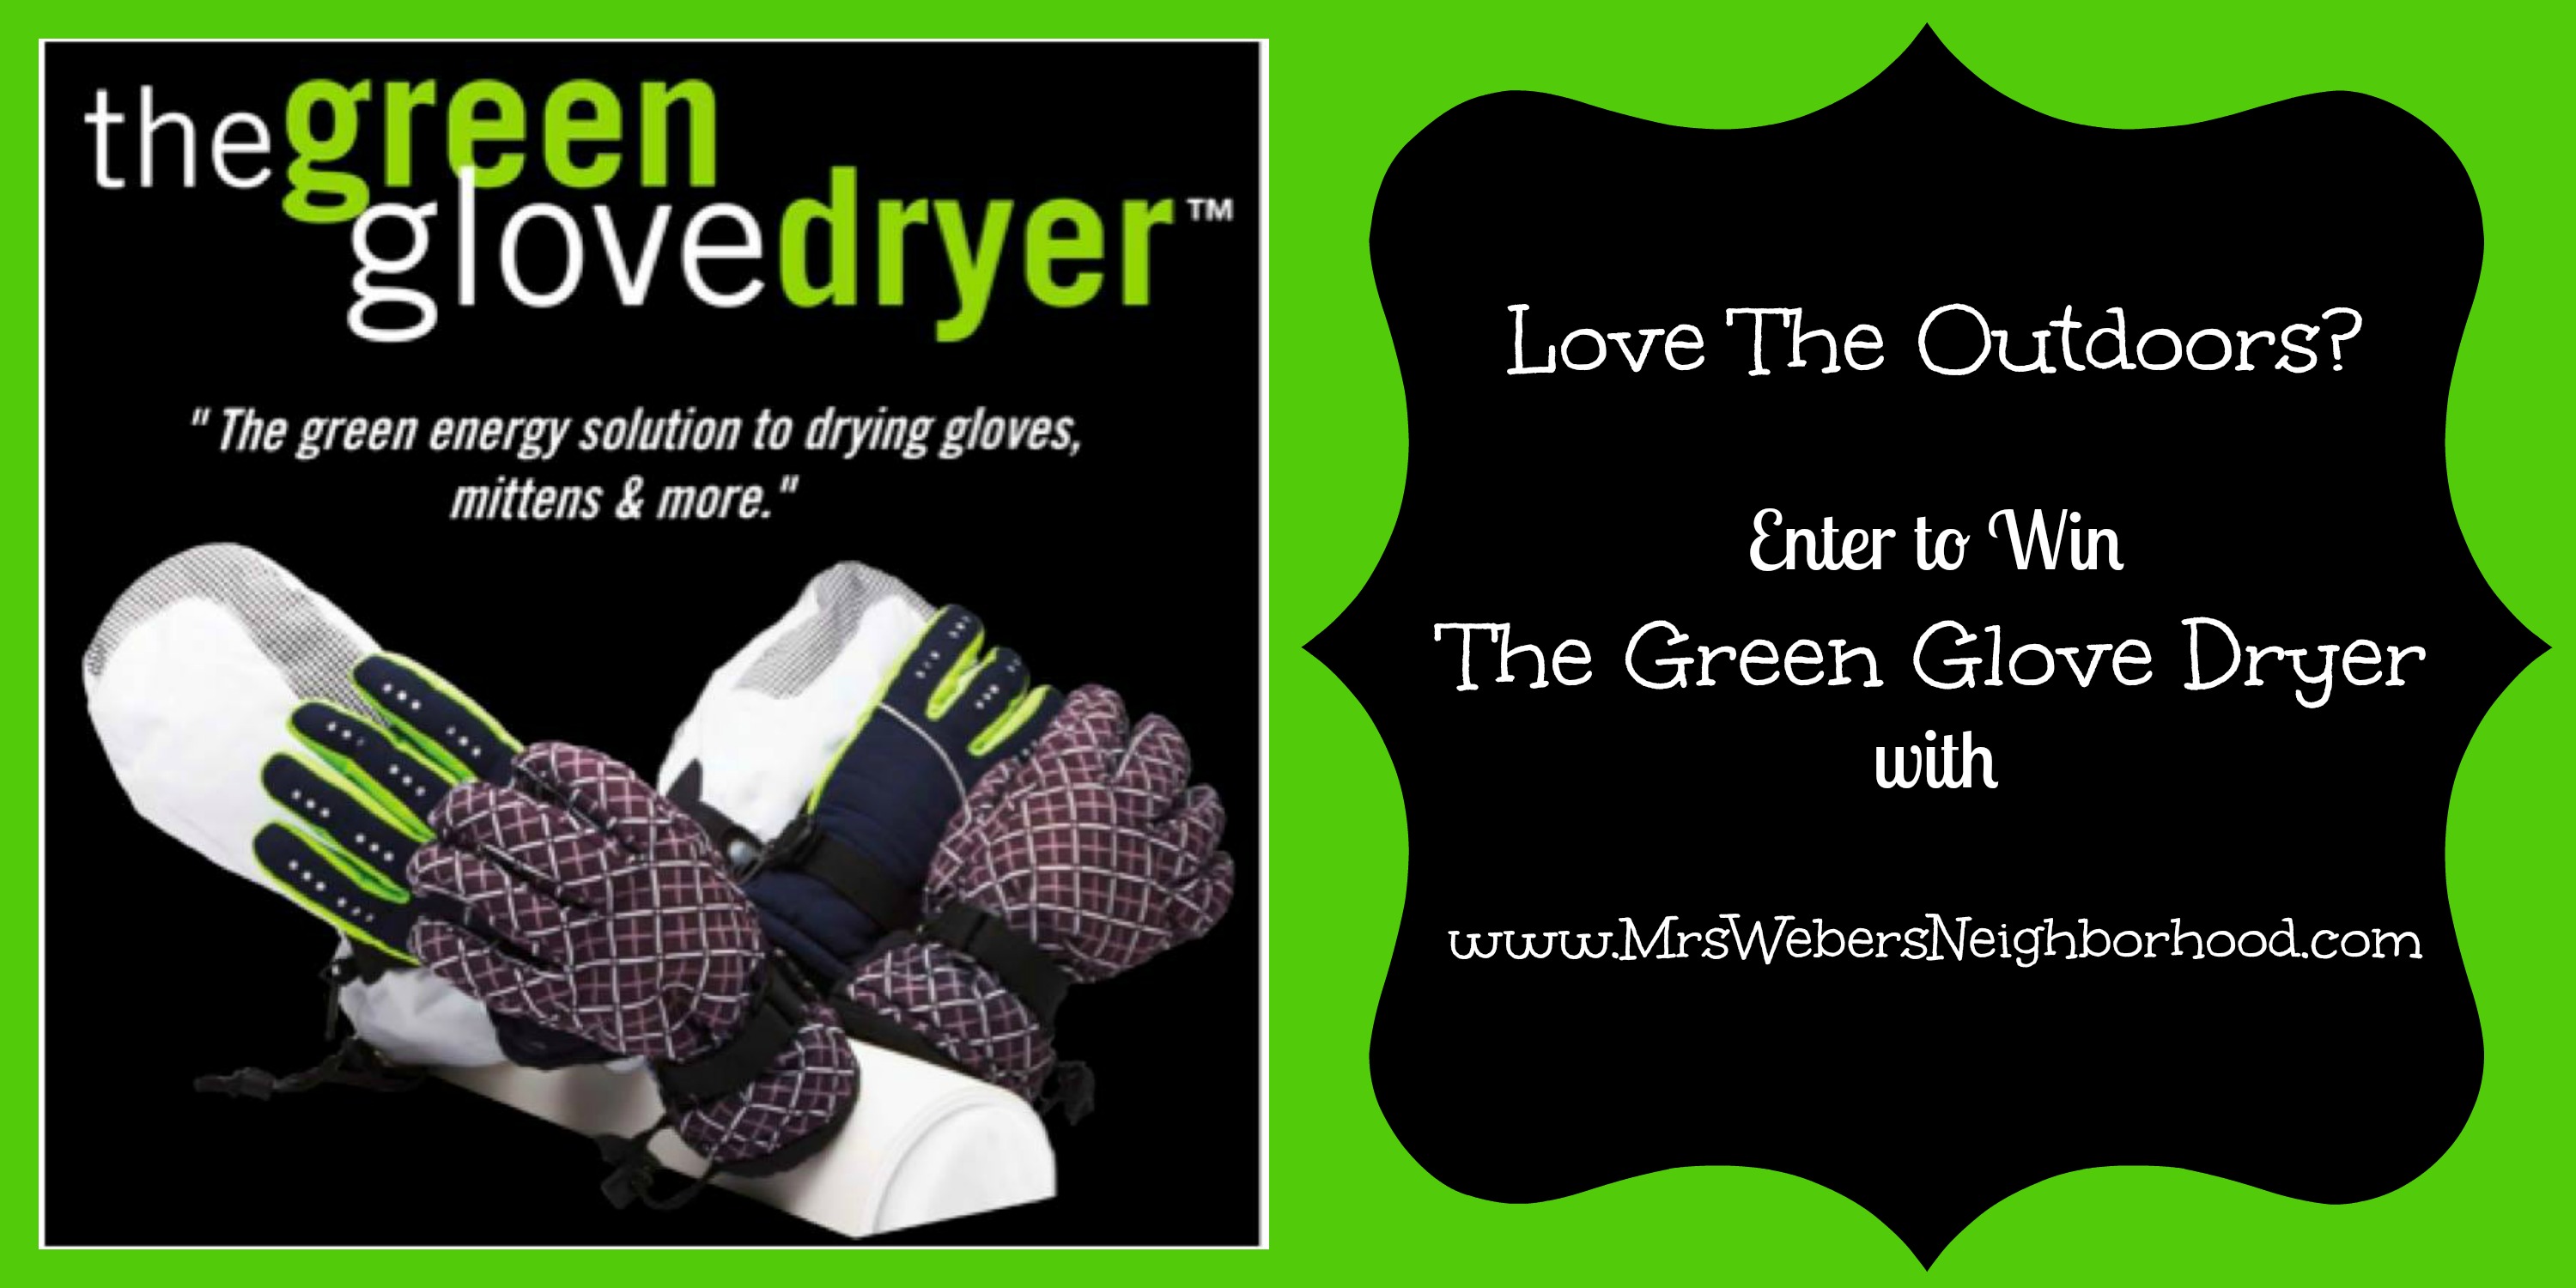 The Green Glove Dryer Giveaway